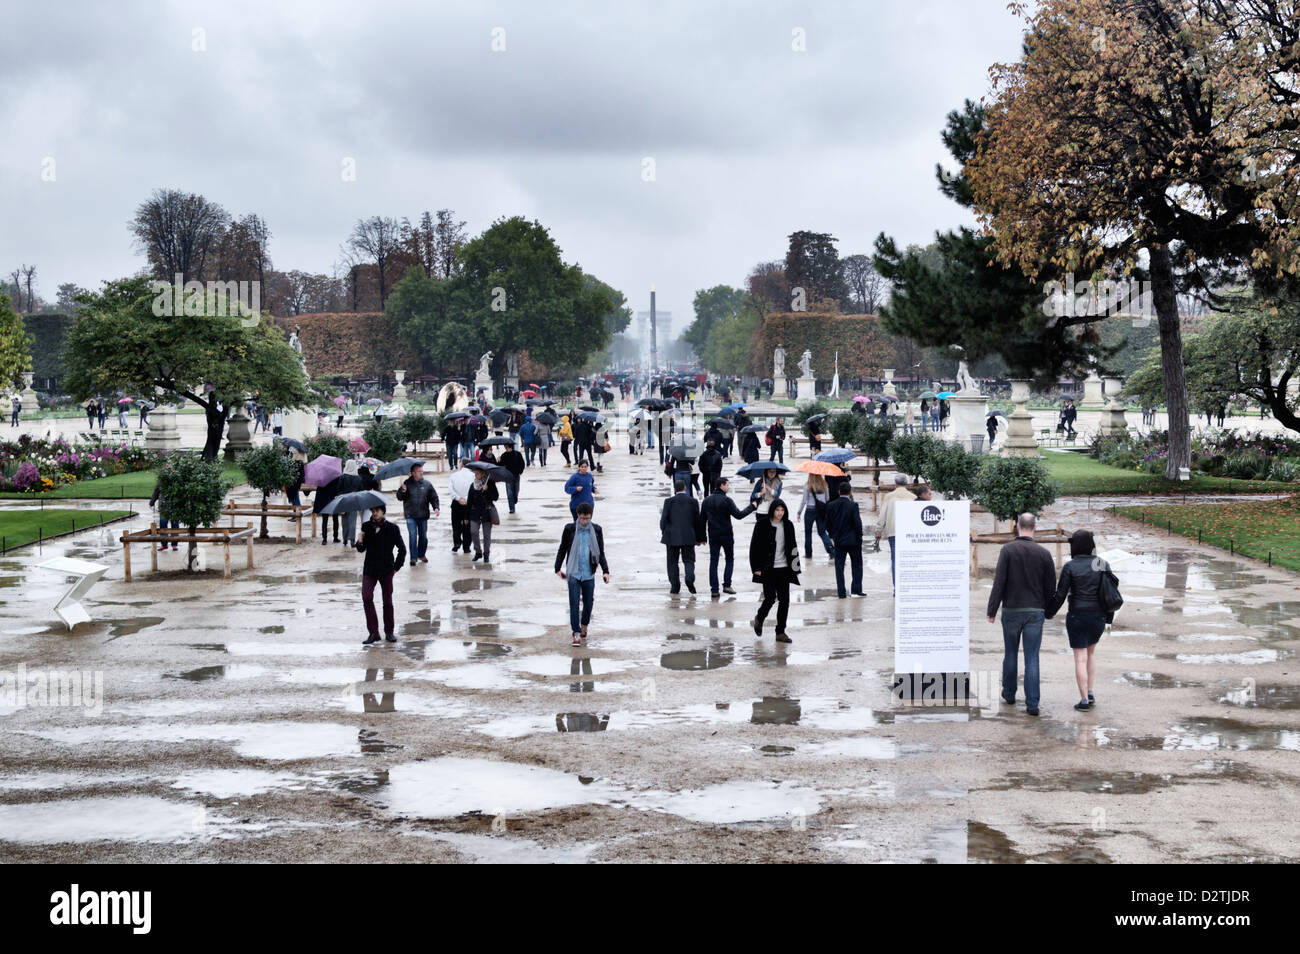 Paris, France - people with umbrellas walking through the Jardin des Tuileries on a rainy day Stock Photo